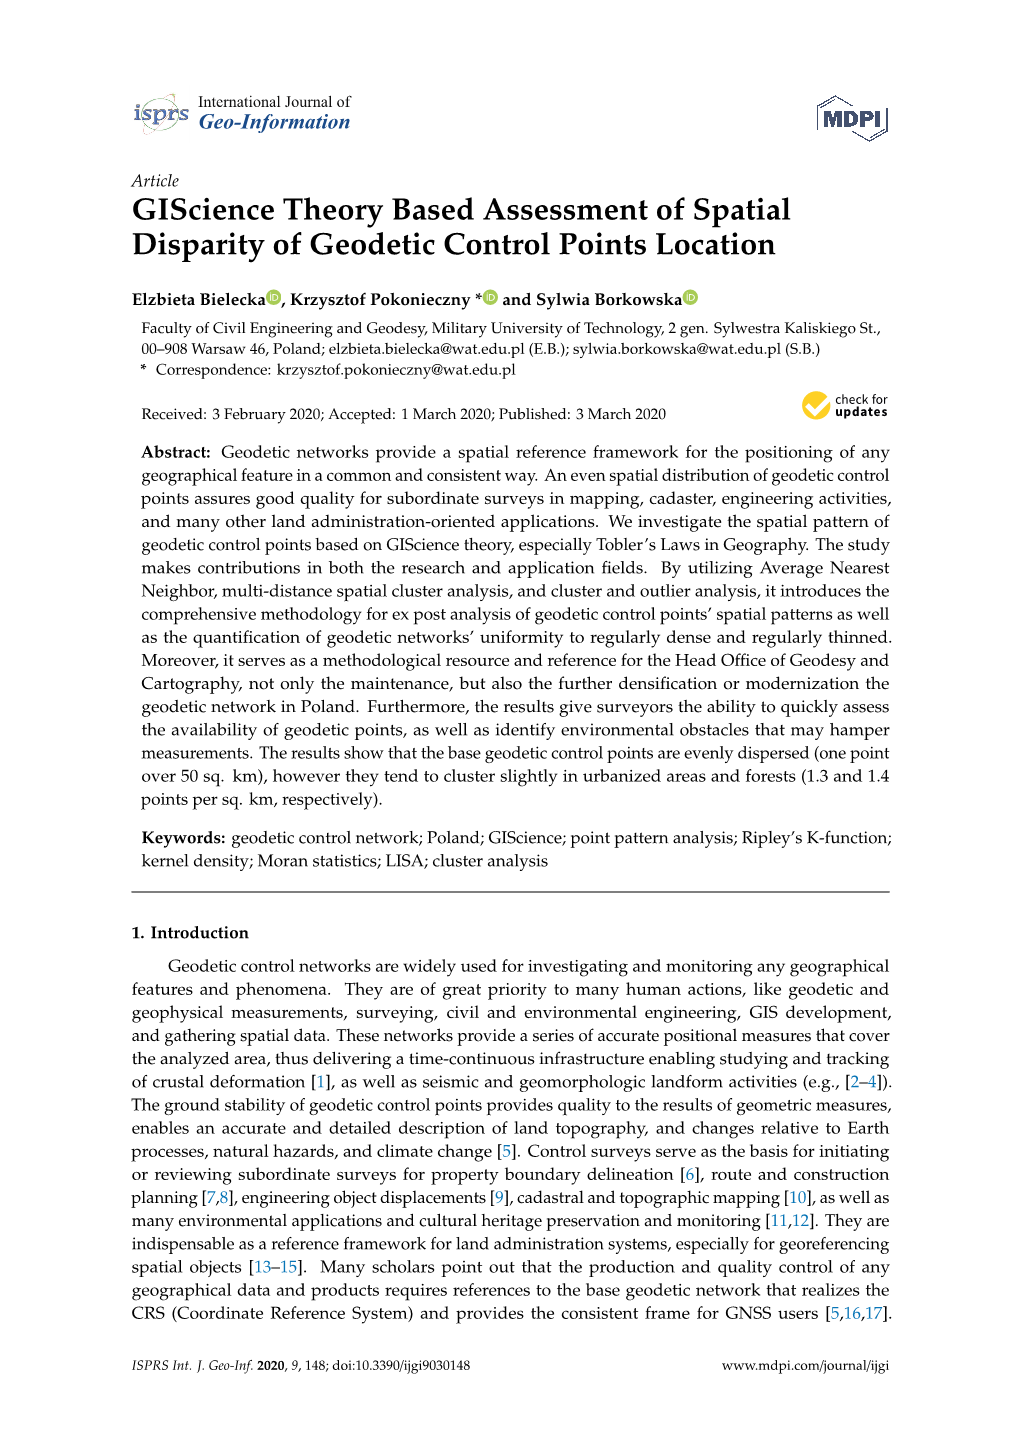 Giscience Theory Based Assessment of Spatial Disparity of Geodetic Control Points Location